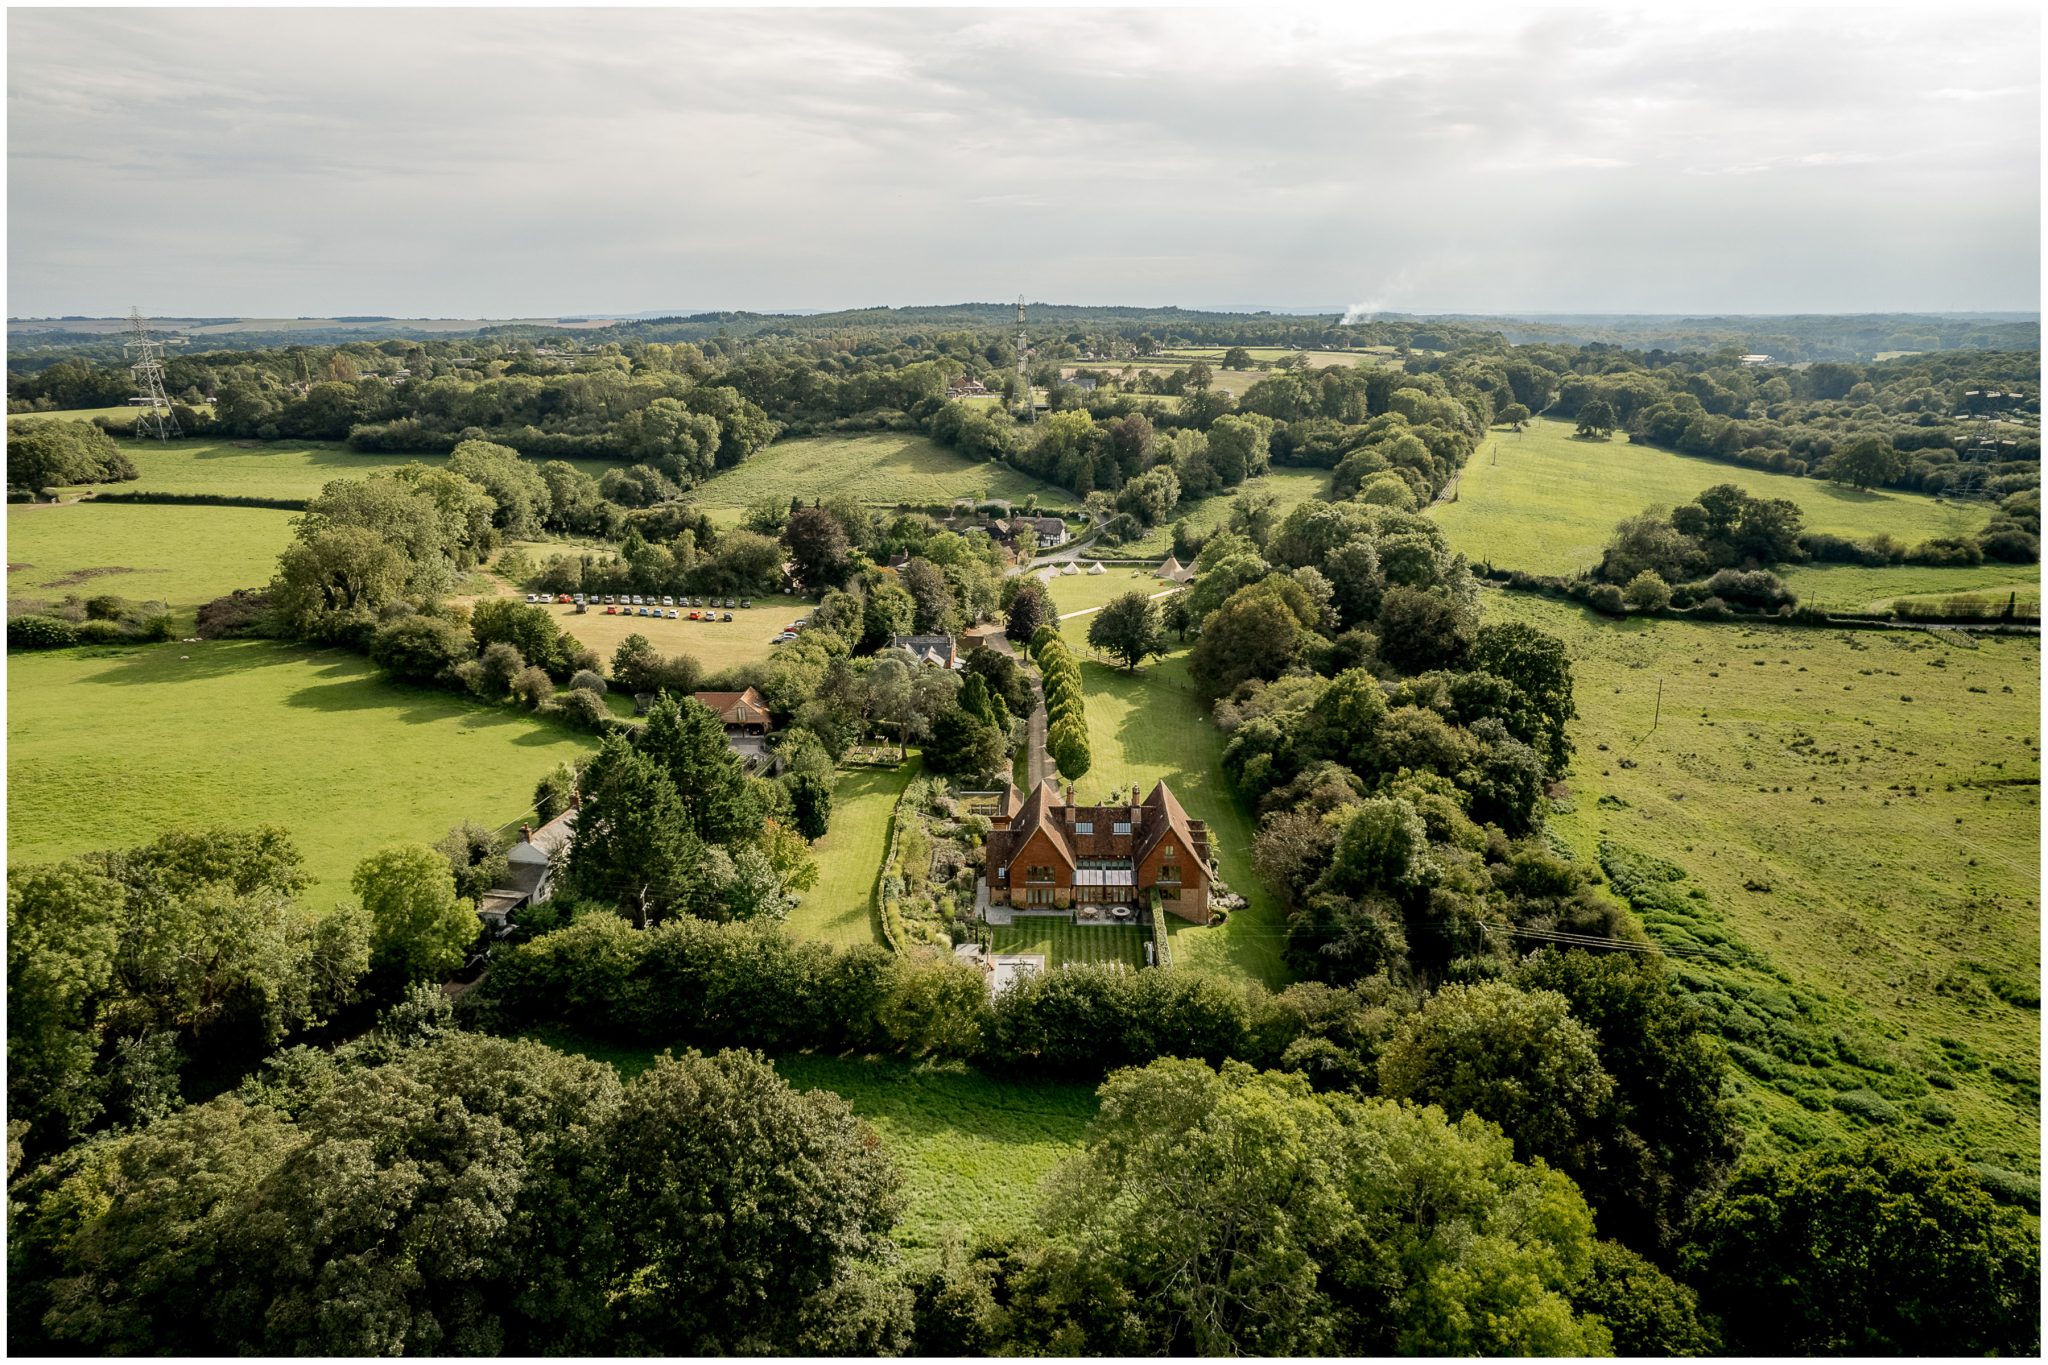 Drone image of wedding reception in the Hampshrie countryside